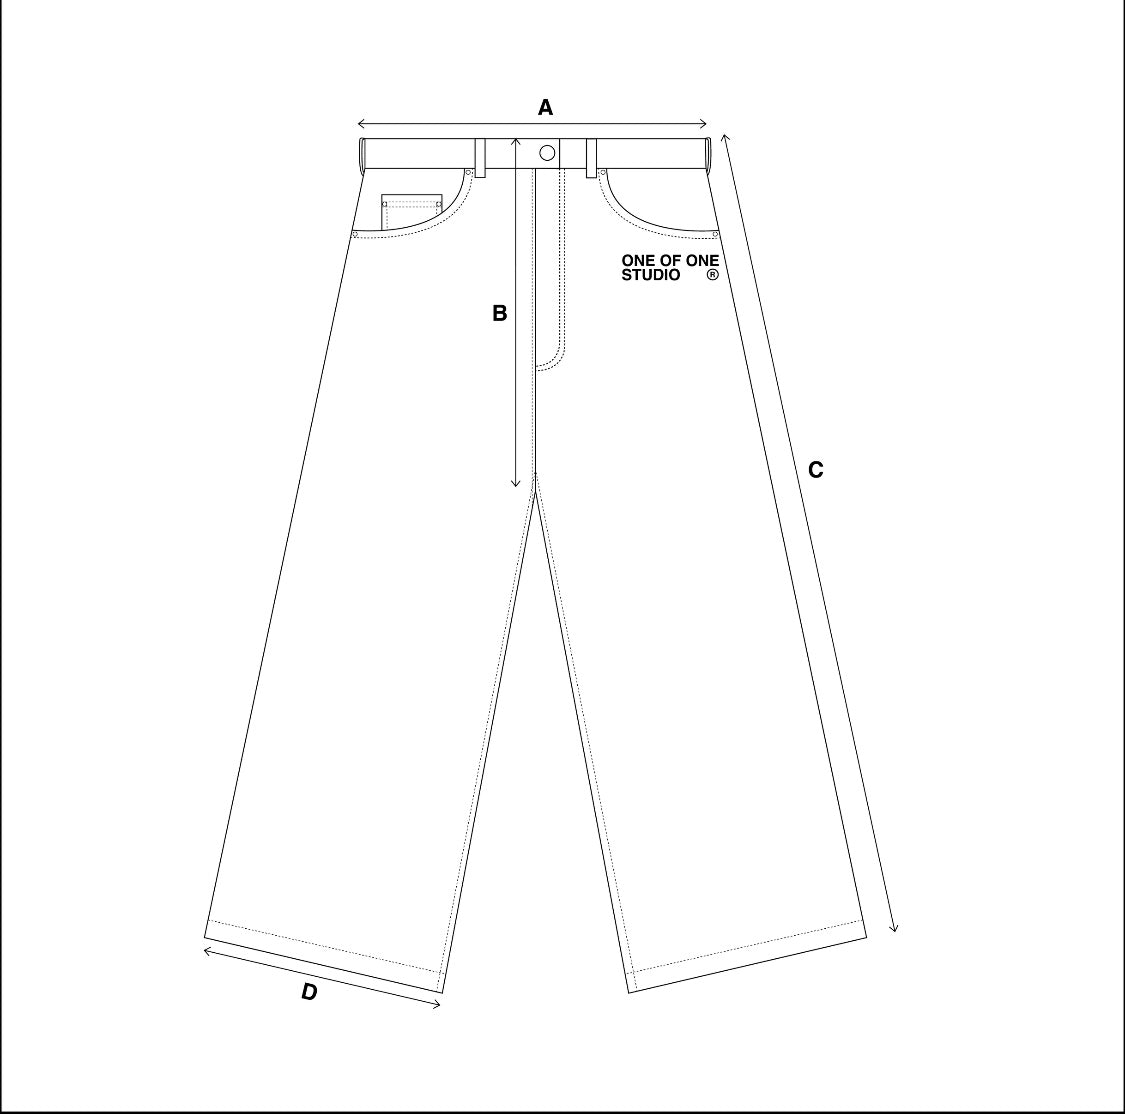 501 LEVI'S EXAGGERATED VINTAGE GREY